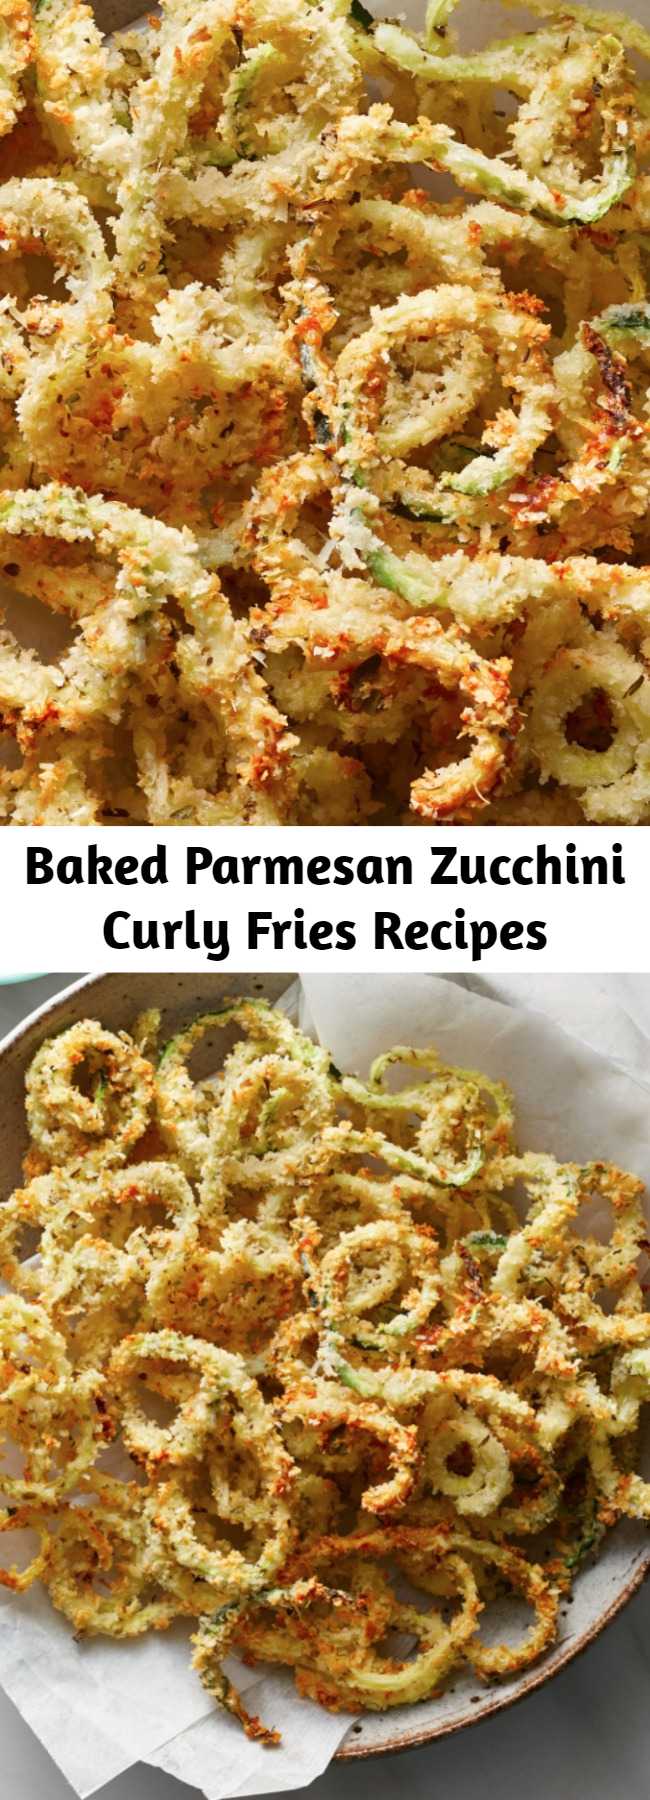 Baked Parmesan Zucchini Curly Fries Recipe - Mom Secret Ingrediets